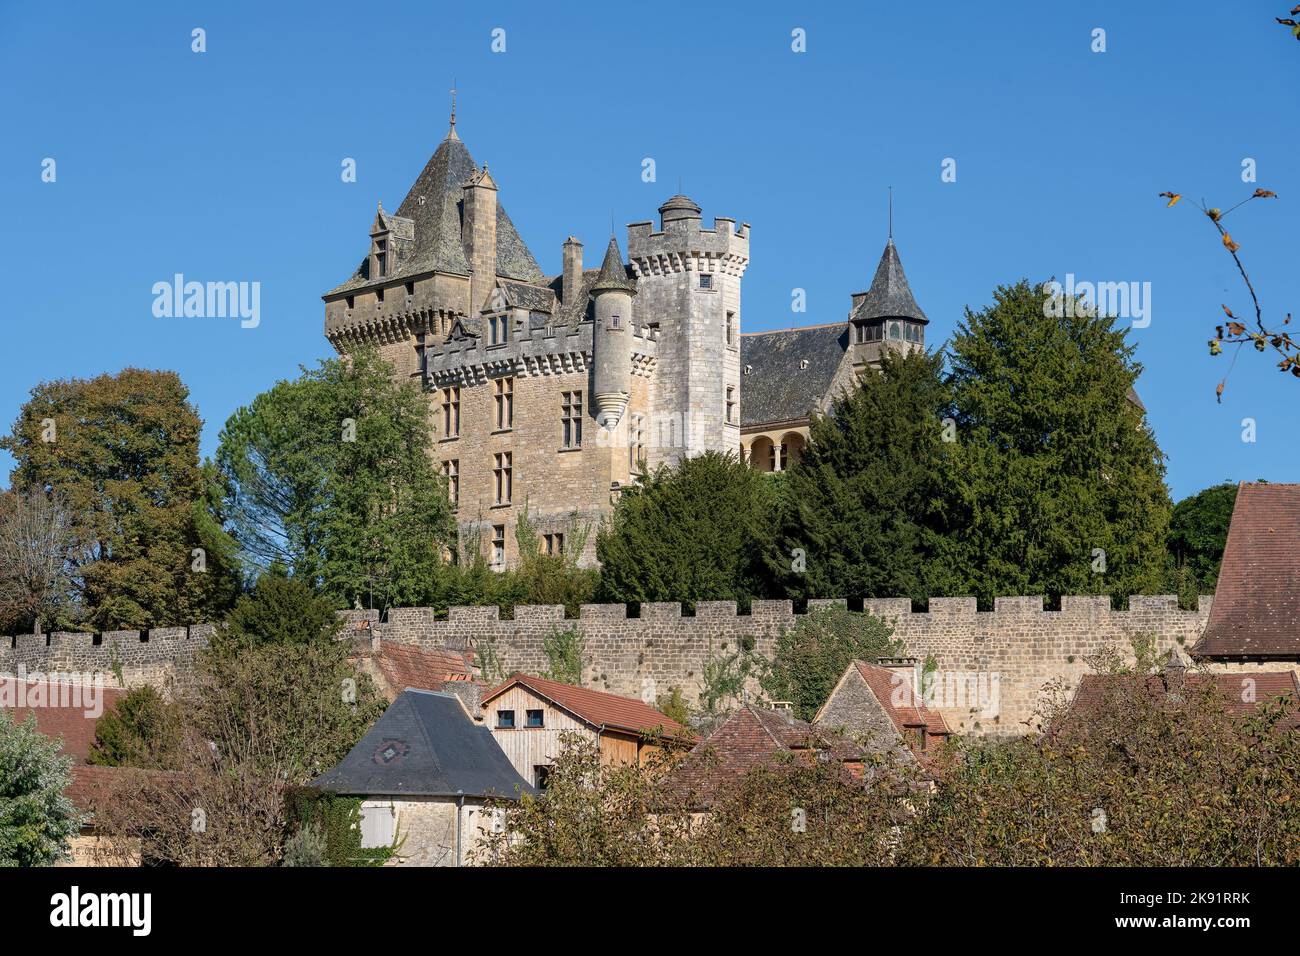 Chateau de Montfort, a private residence in Dordogne France Stock Photo